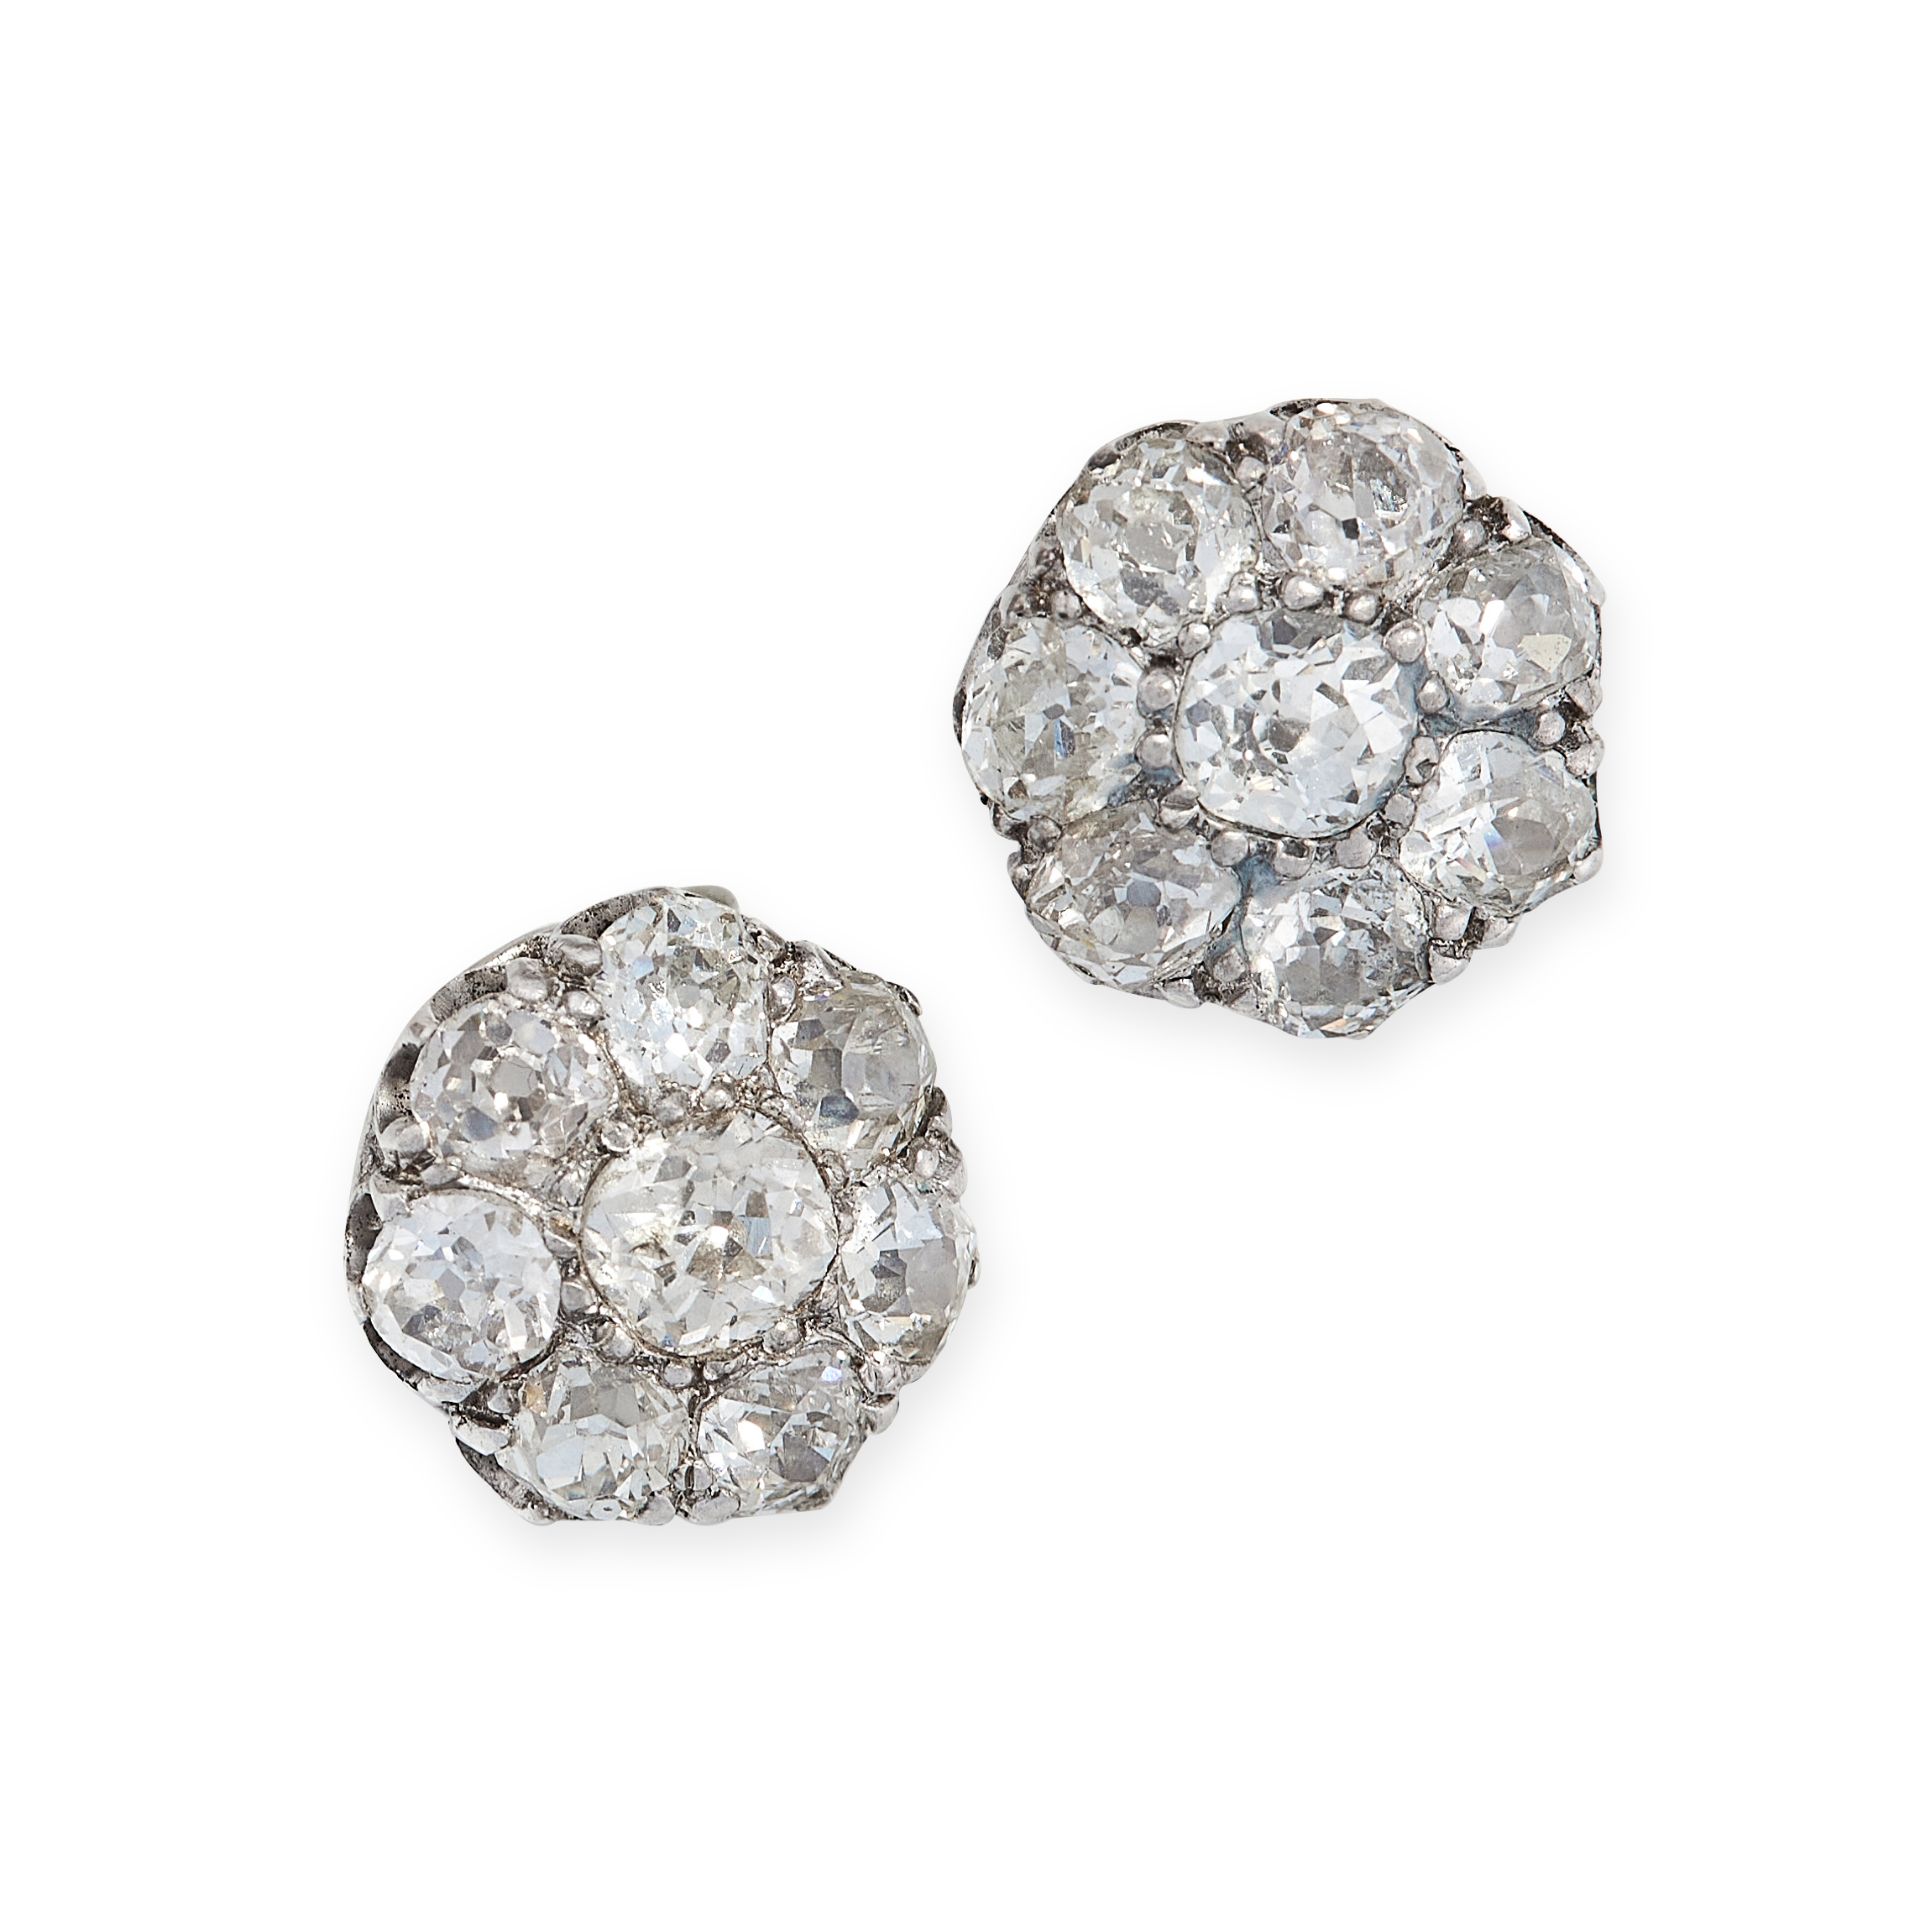 A PAIR OF DIAMOND STUD EARRINGS each set with a cluster of old cut diamonds, the diamonds all